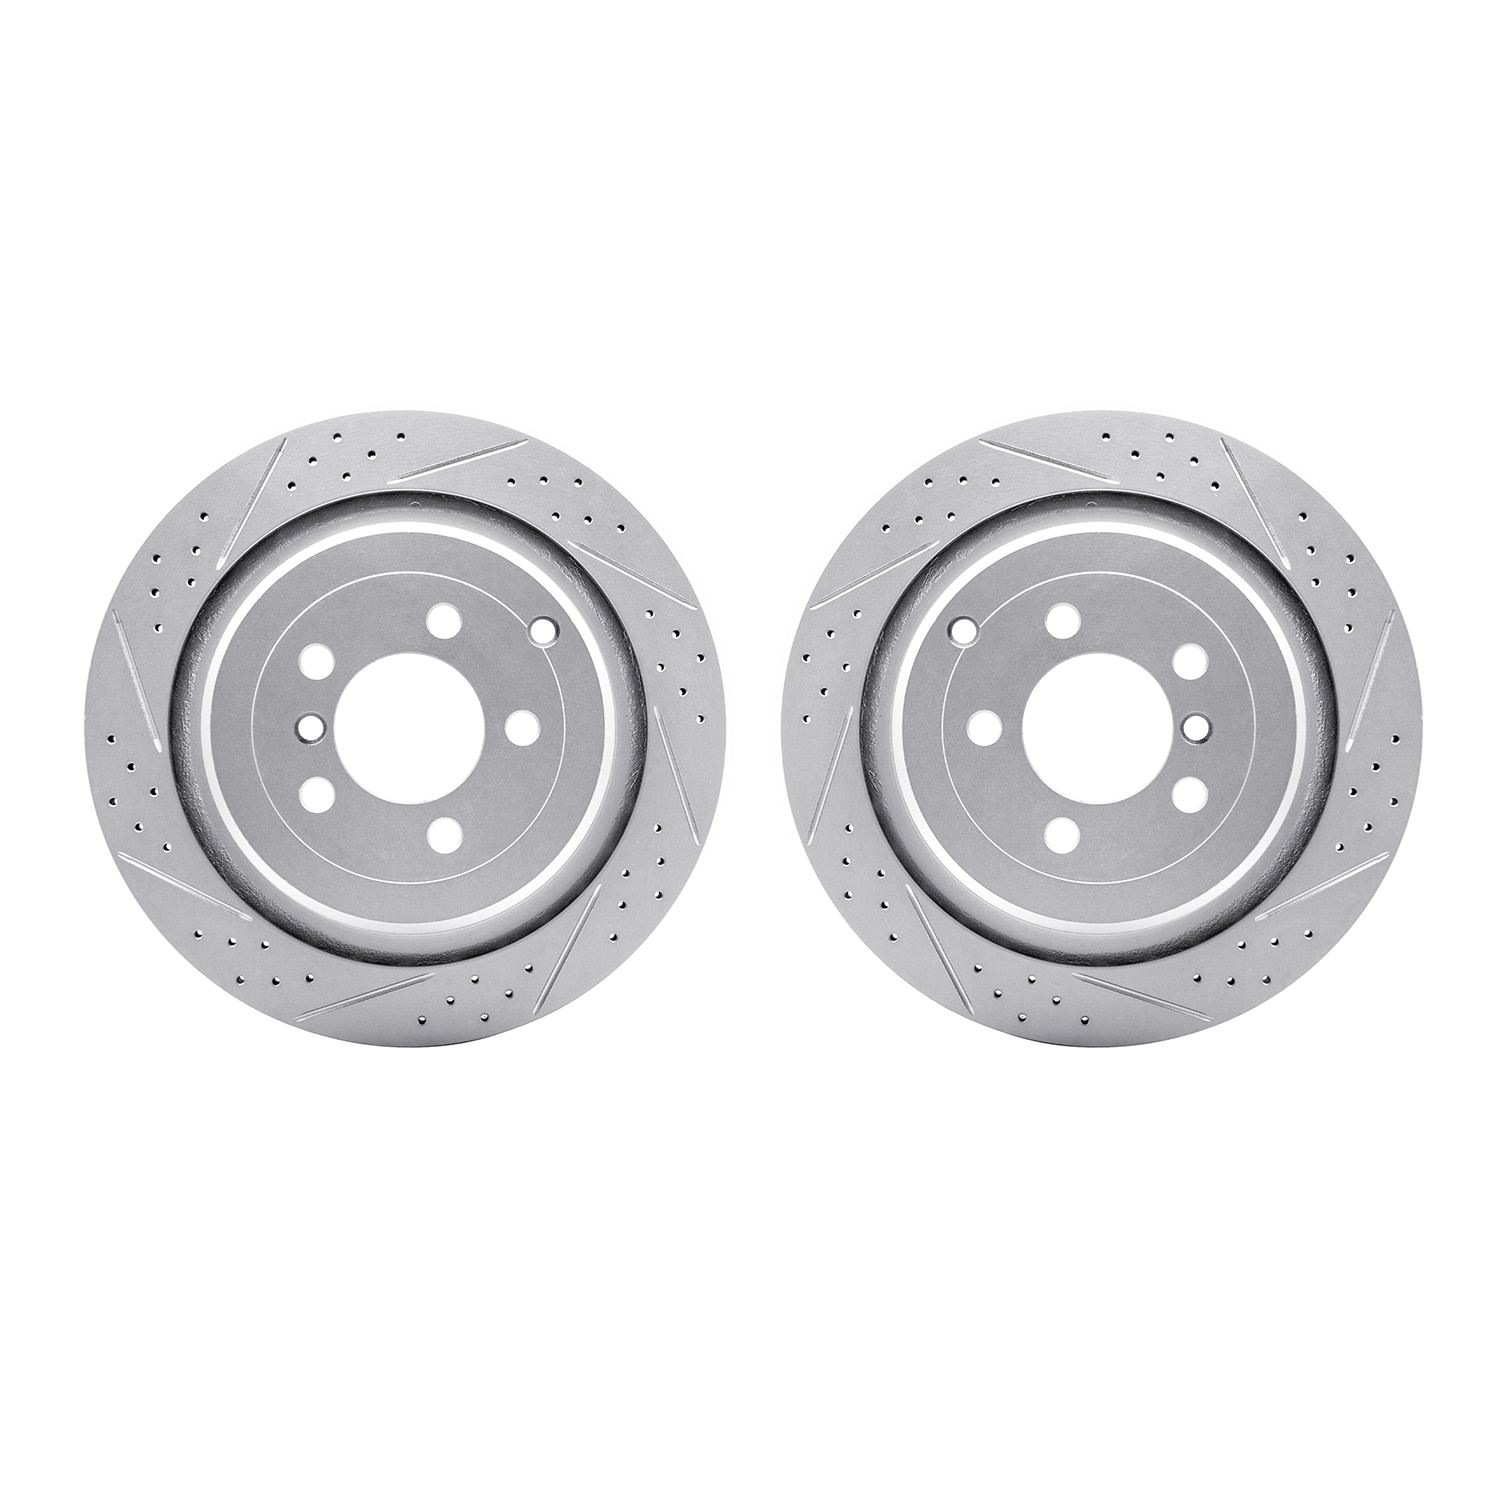 2002-11028 Geoperformance Drilled/Slotted Brake Rotors, 2006-2012 Land Rover, Position: Rear